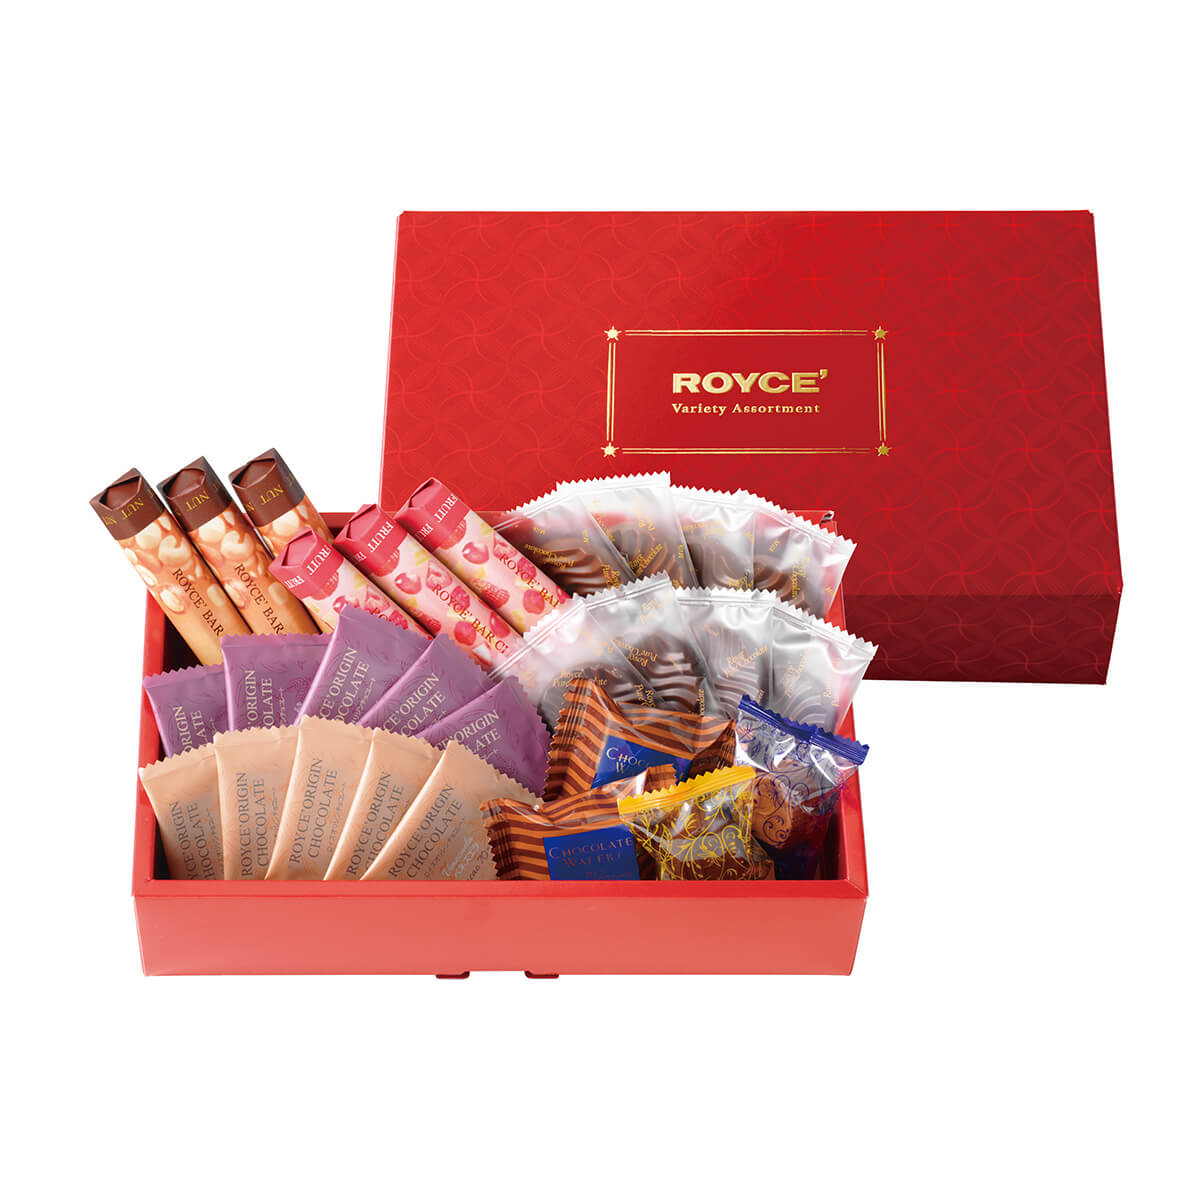 ROYCE' Chocolate - ROYCE’ Variety Assortment - Image shows (on lower left middle) a red box filled with individually-wrapped confections and (on top middle right) a red box with gold text saying ROYCE' Variety Assortment.